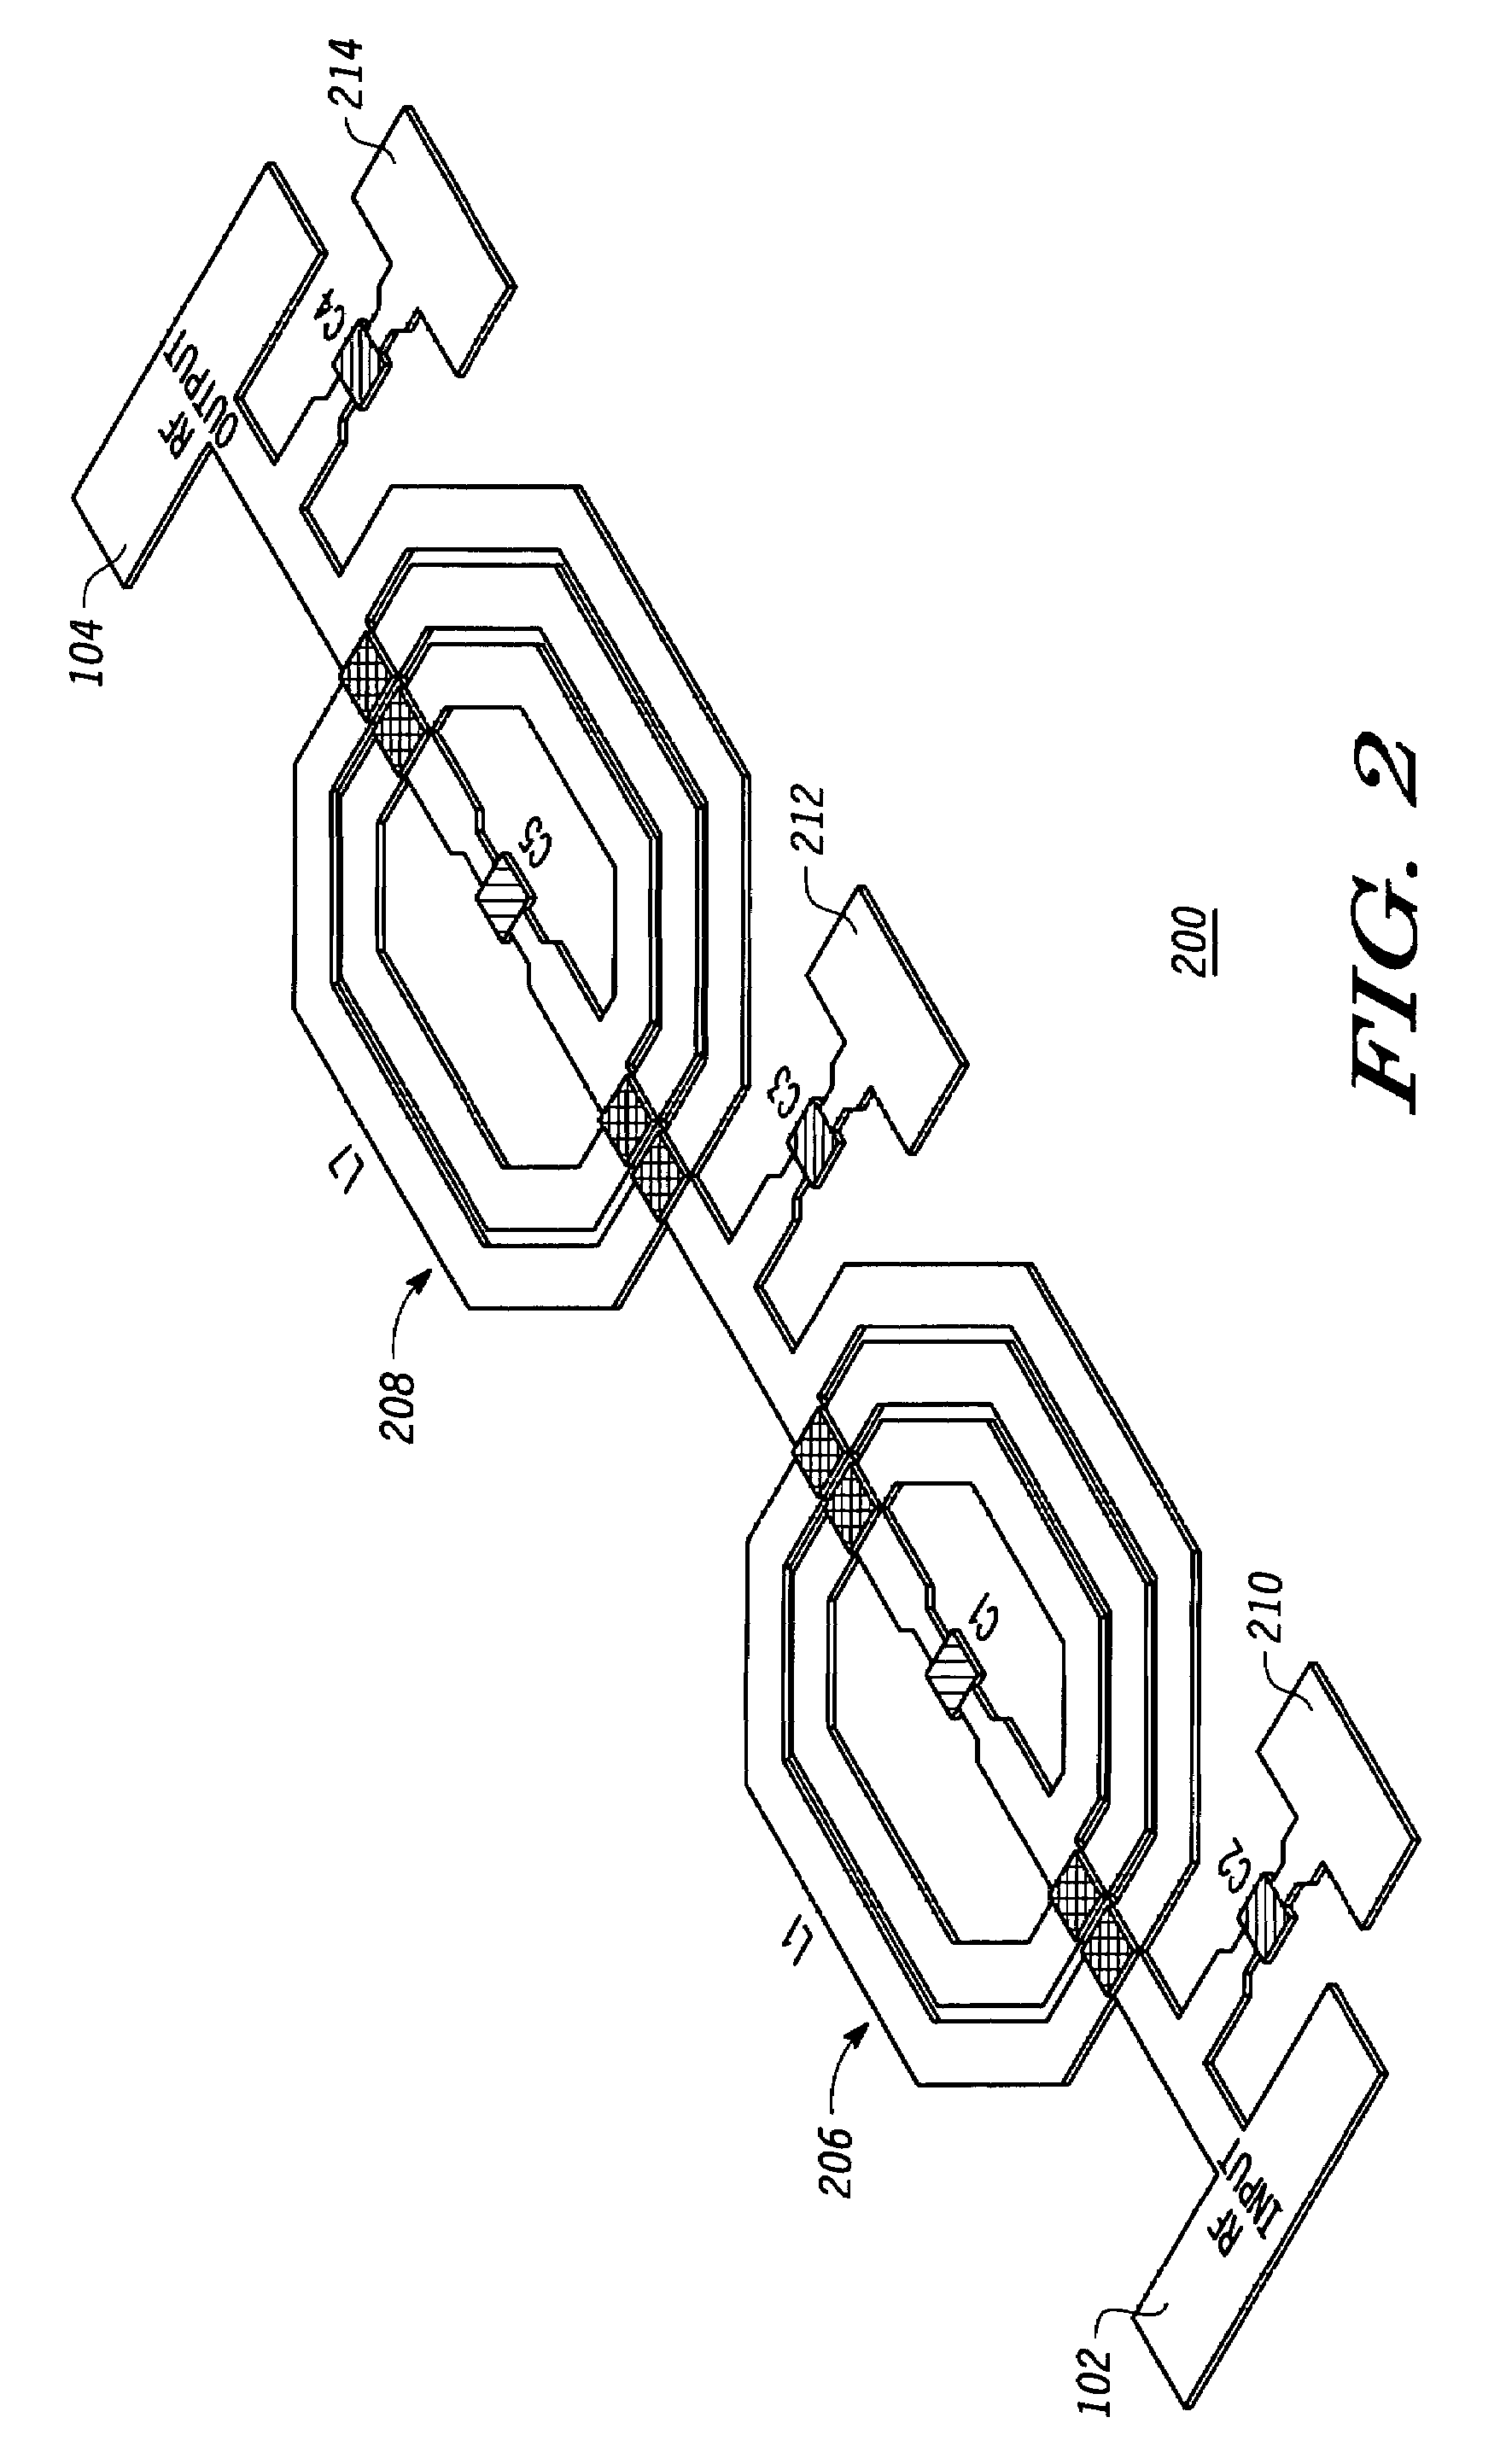 Compact radio frequency harmonic filter using integrated passive device technology